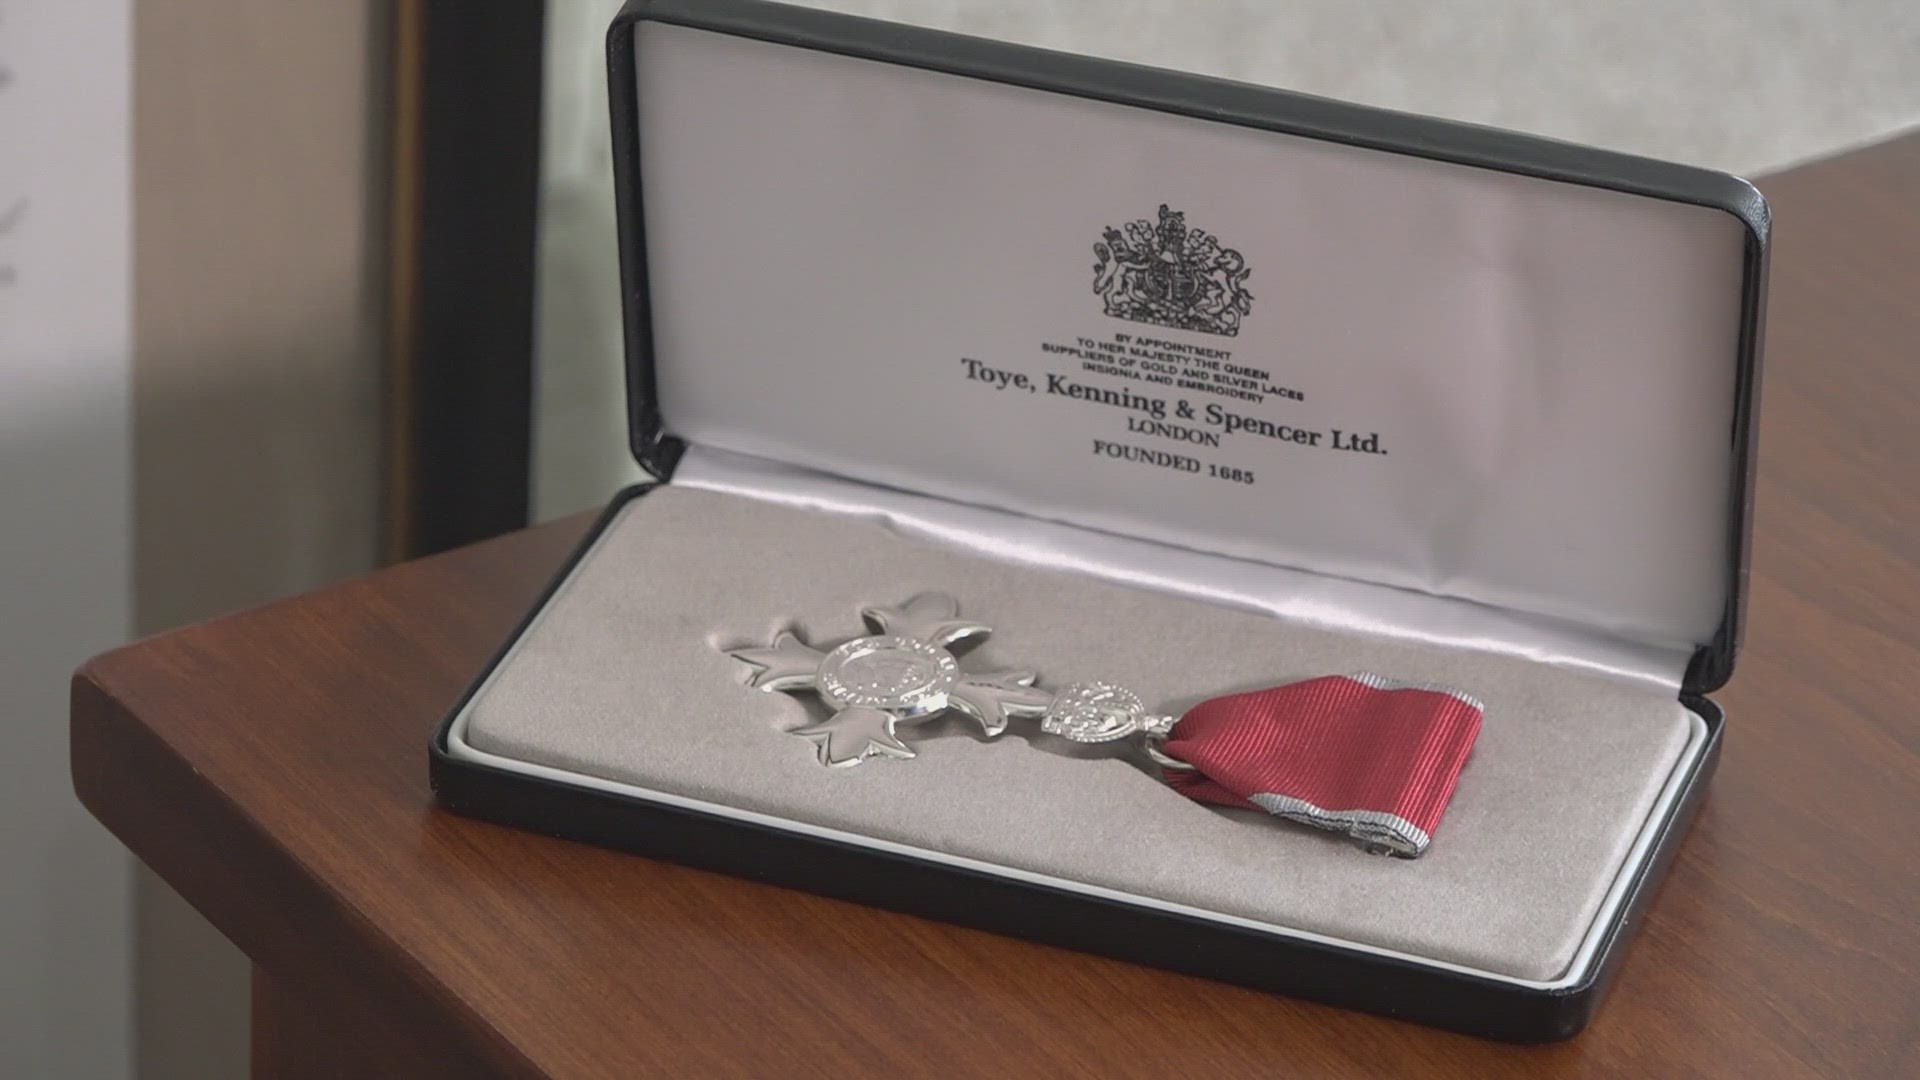 The U.K. native recently got an MBE award from Buckingham Palace for his and his wife's efforts in helping so many kids and teens receive an education.